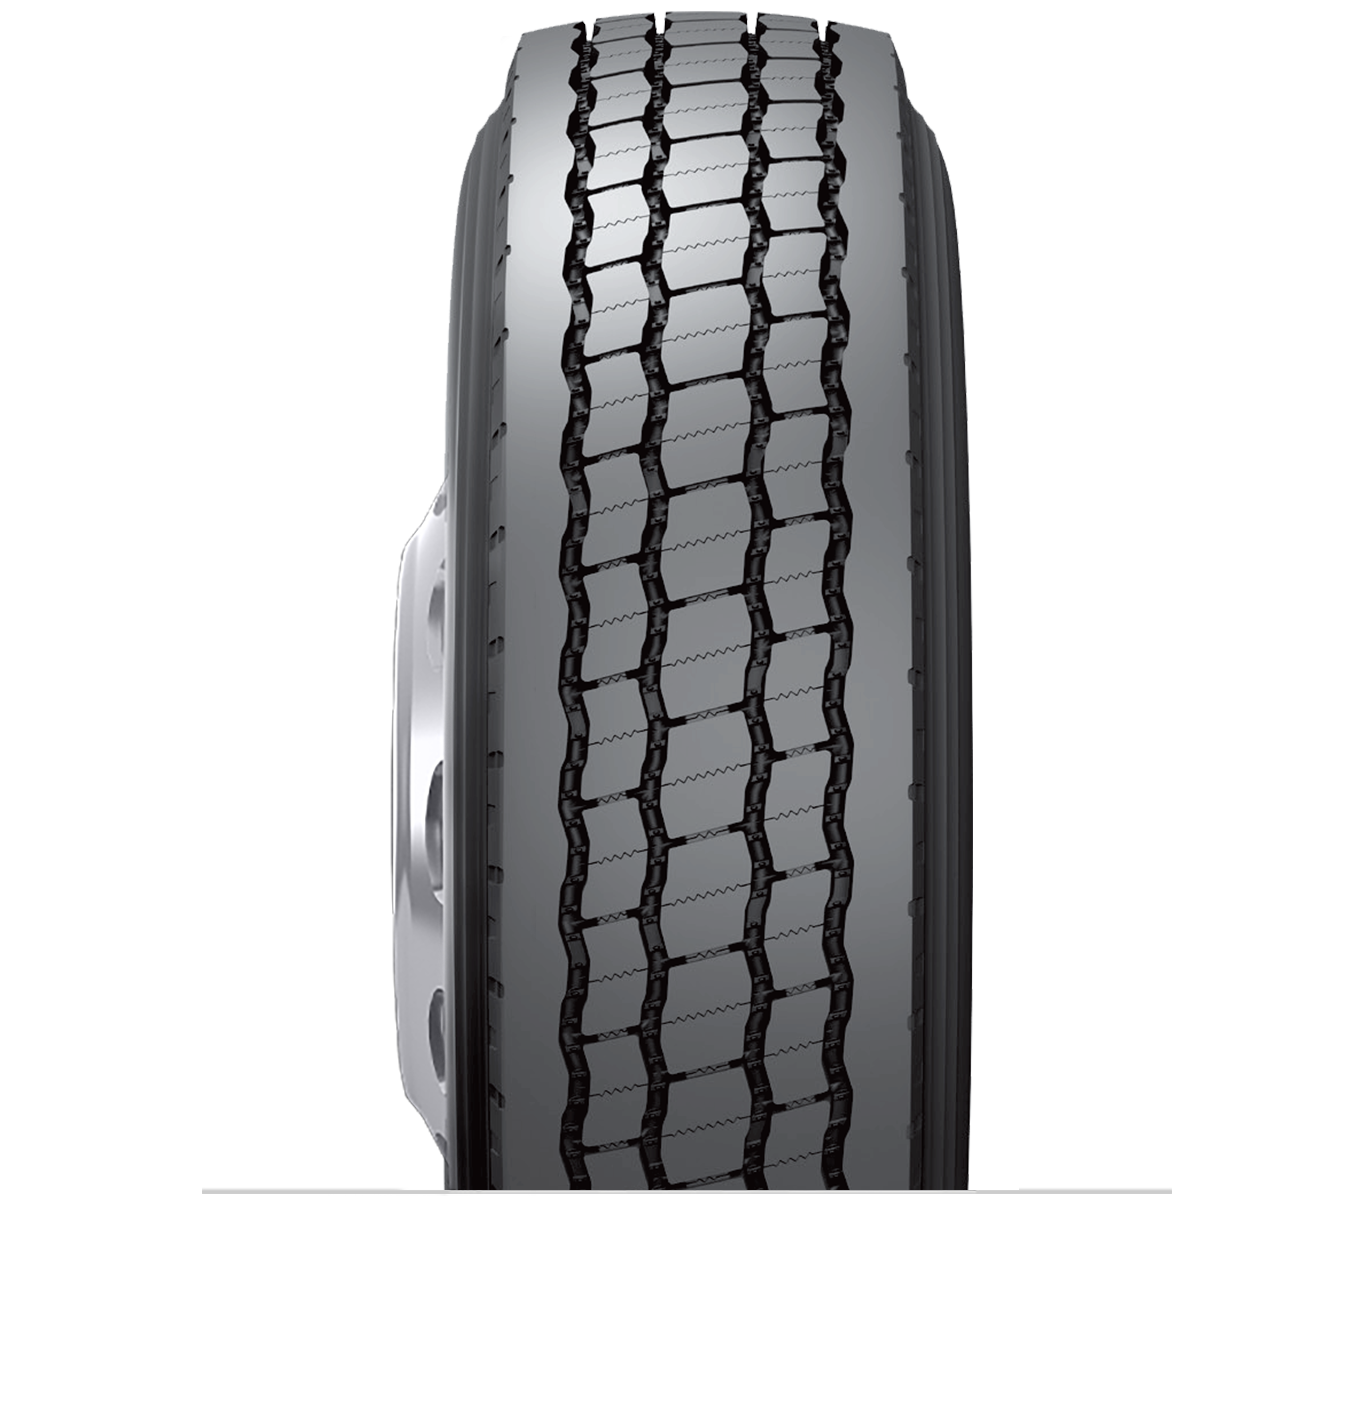 B713 ™ Retread Tire Specialized Features